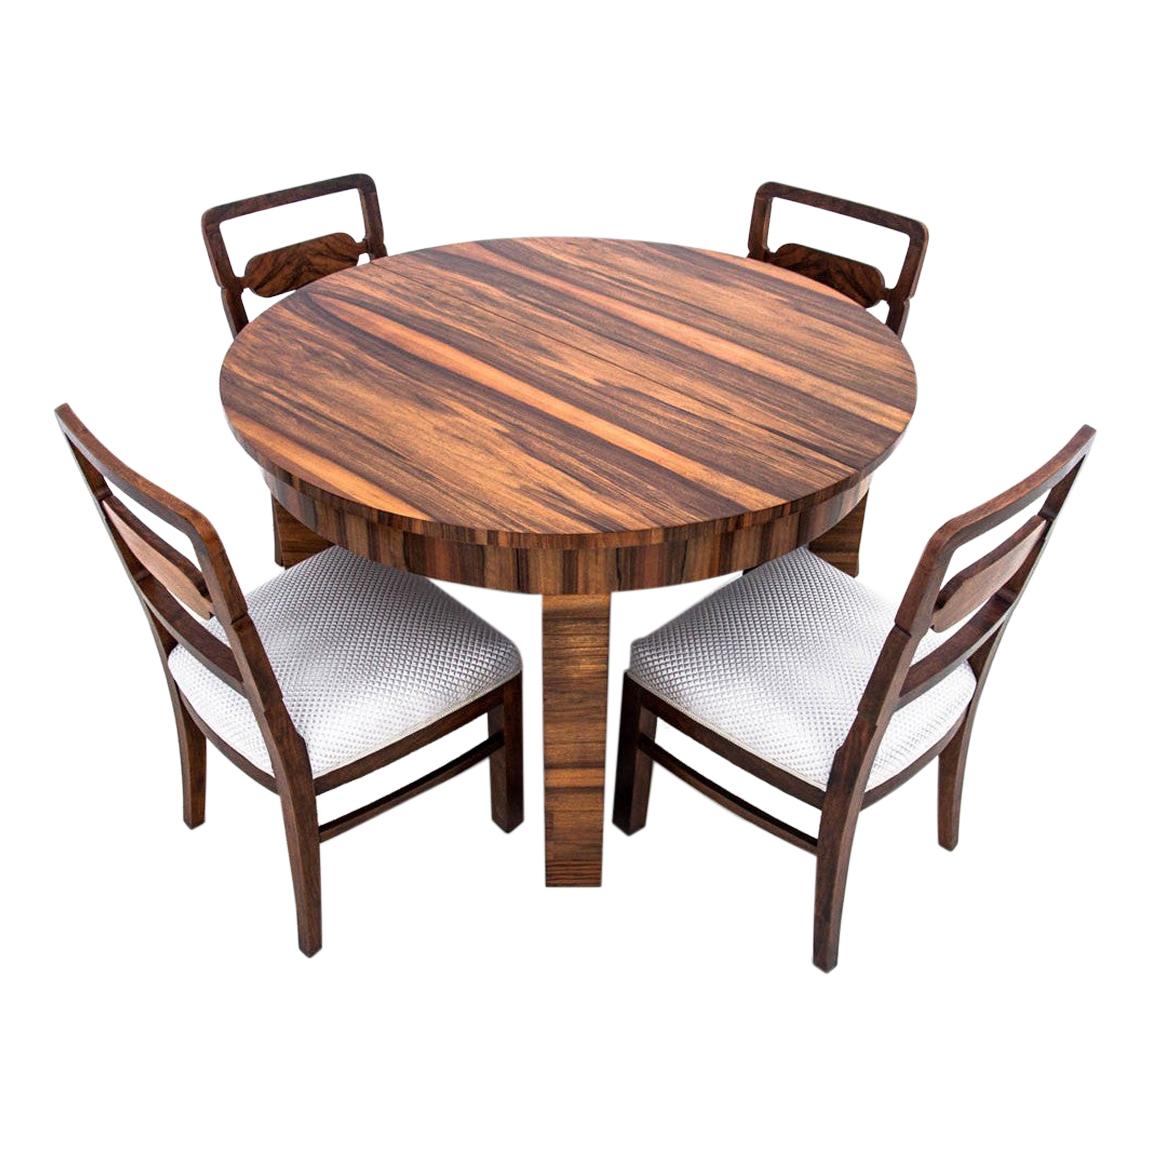 Art Deco Table with Chairs, Poland, 1950s, Renovated